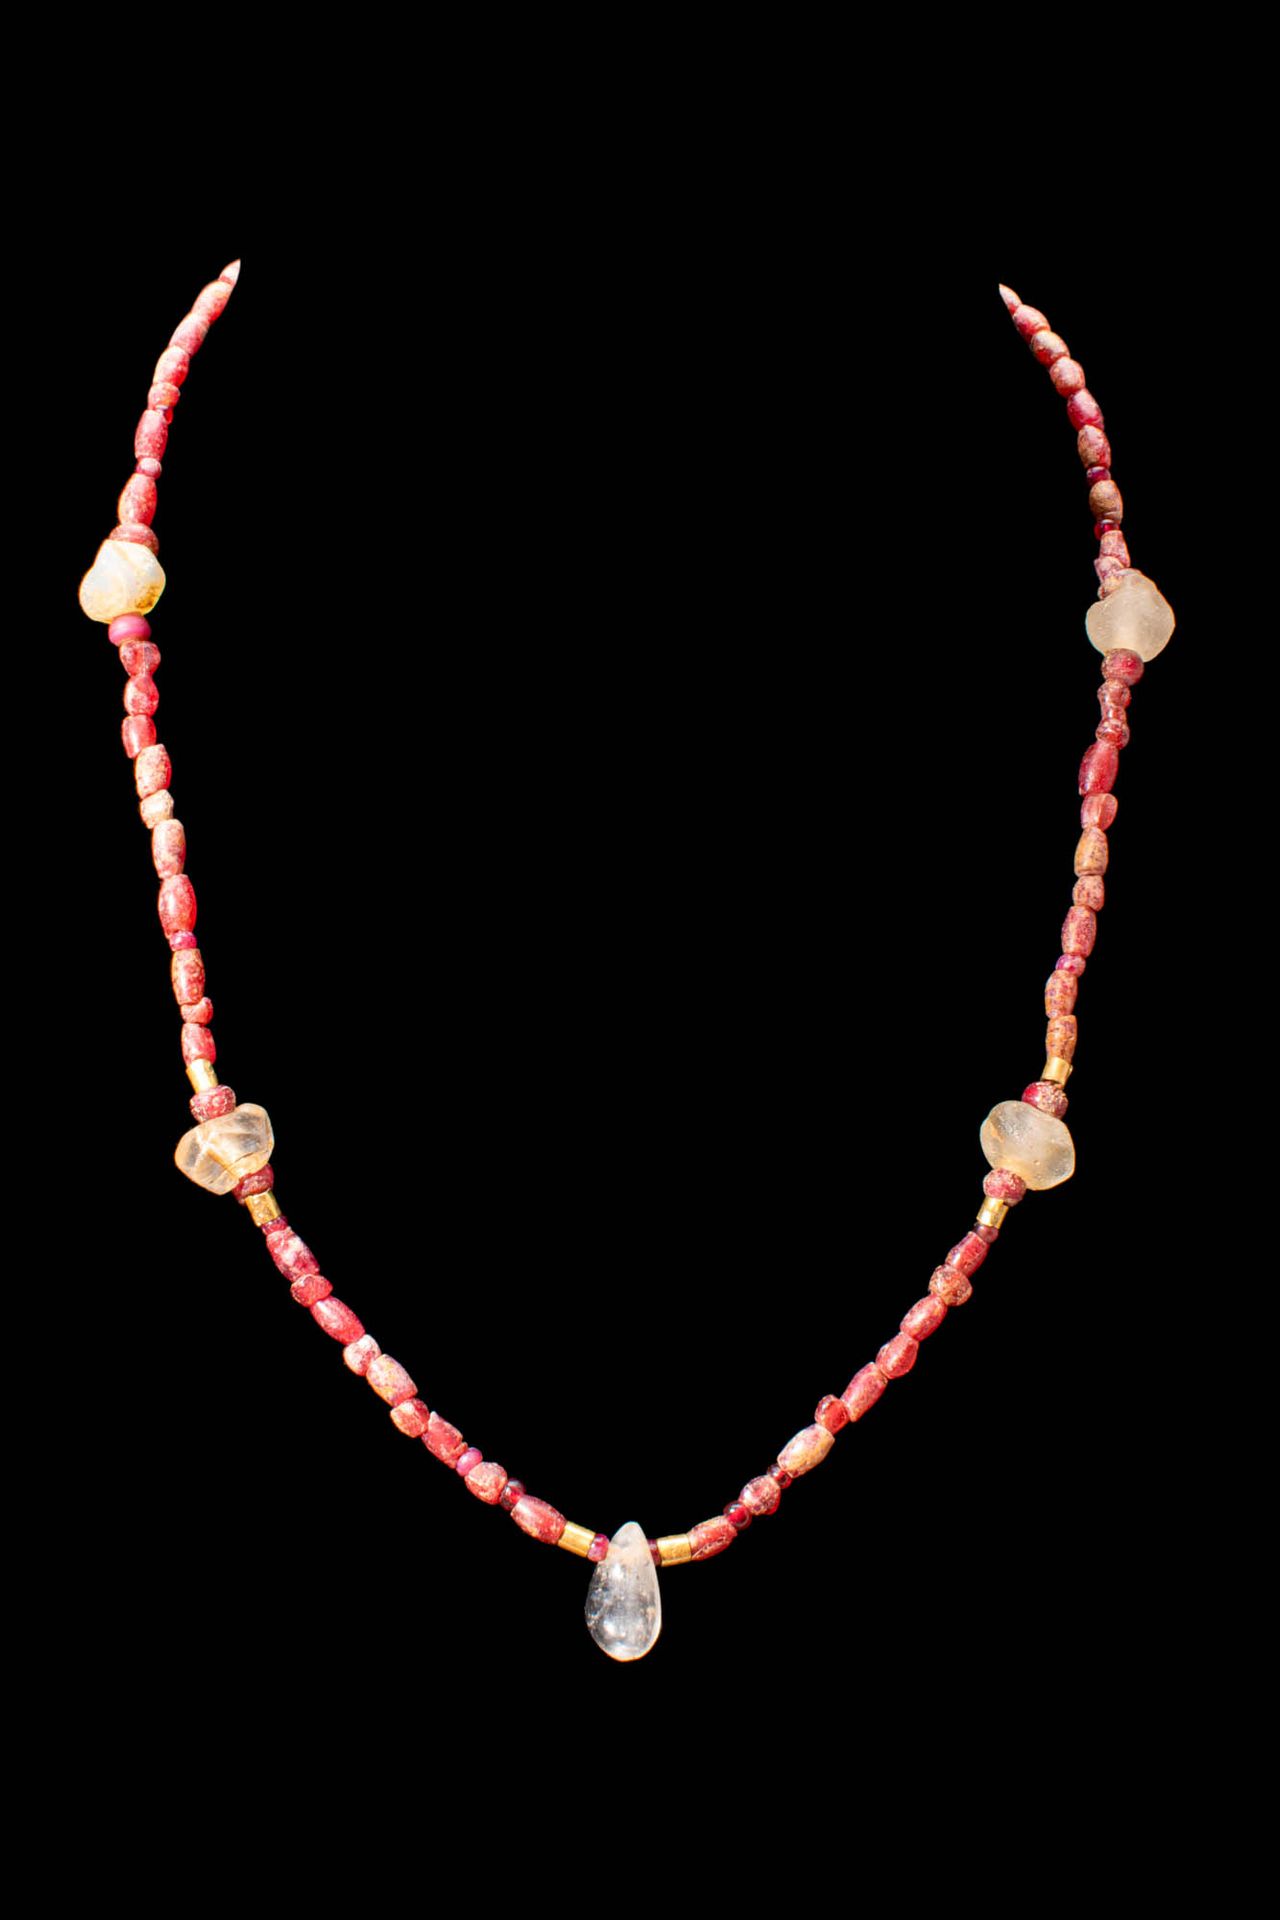 ROMANO-EGYPTIAN CARNELIAN AND ROCK CRYSTAL NECKLACE 托勒密至罗马时期，约公元前 100 年至公元 101 年&hellip;